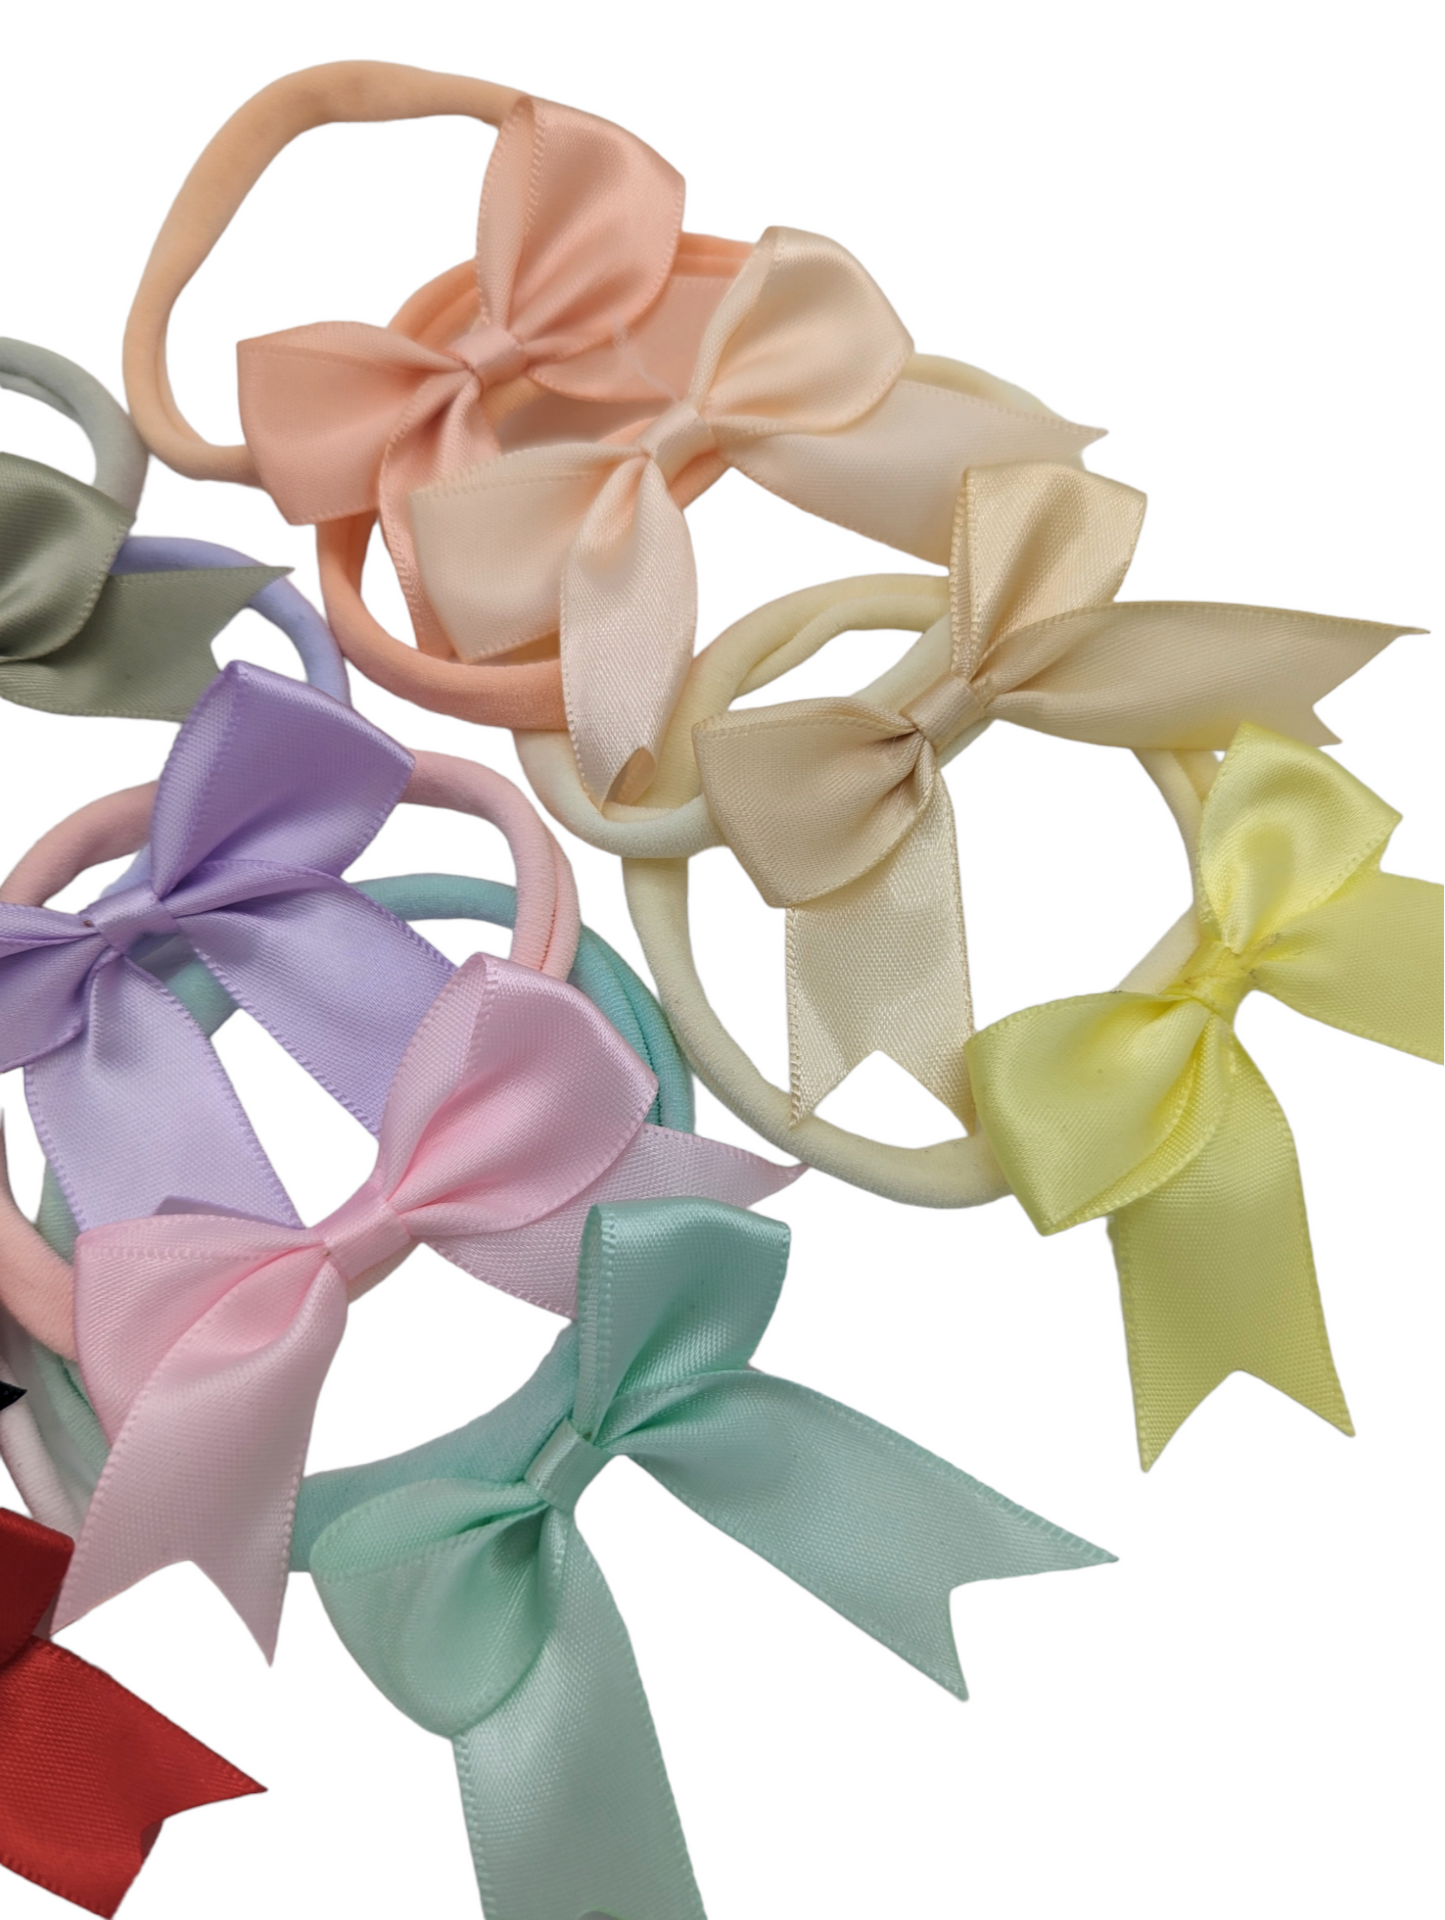 Pack of 12 - 2.5 inch Satin Kiss Dainty Bow Headband - Betty Brown Boutique Ltd